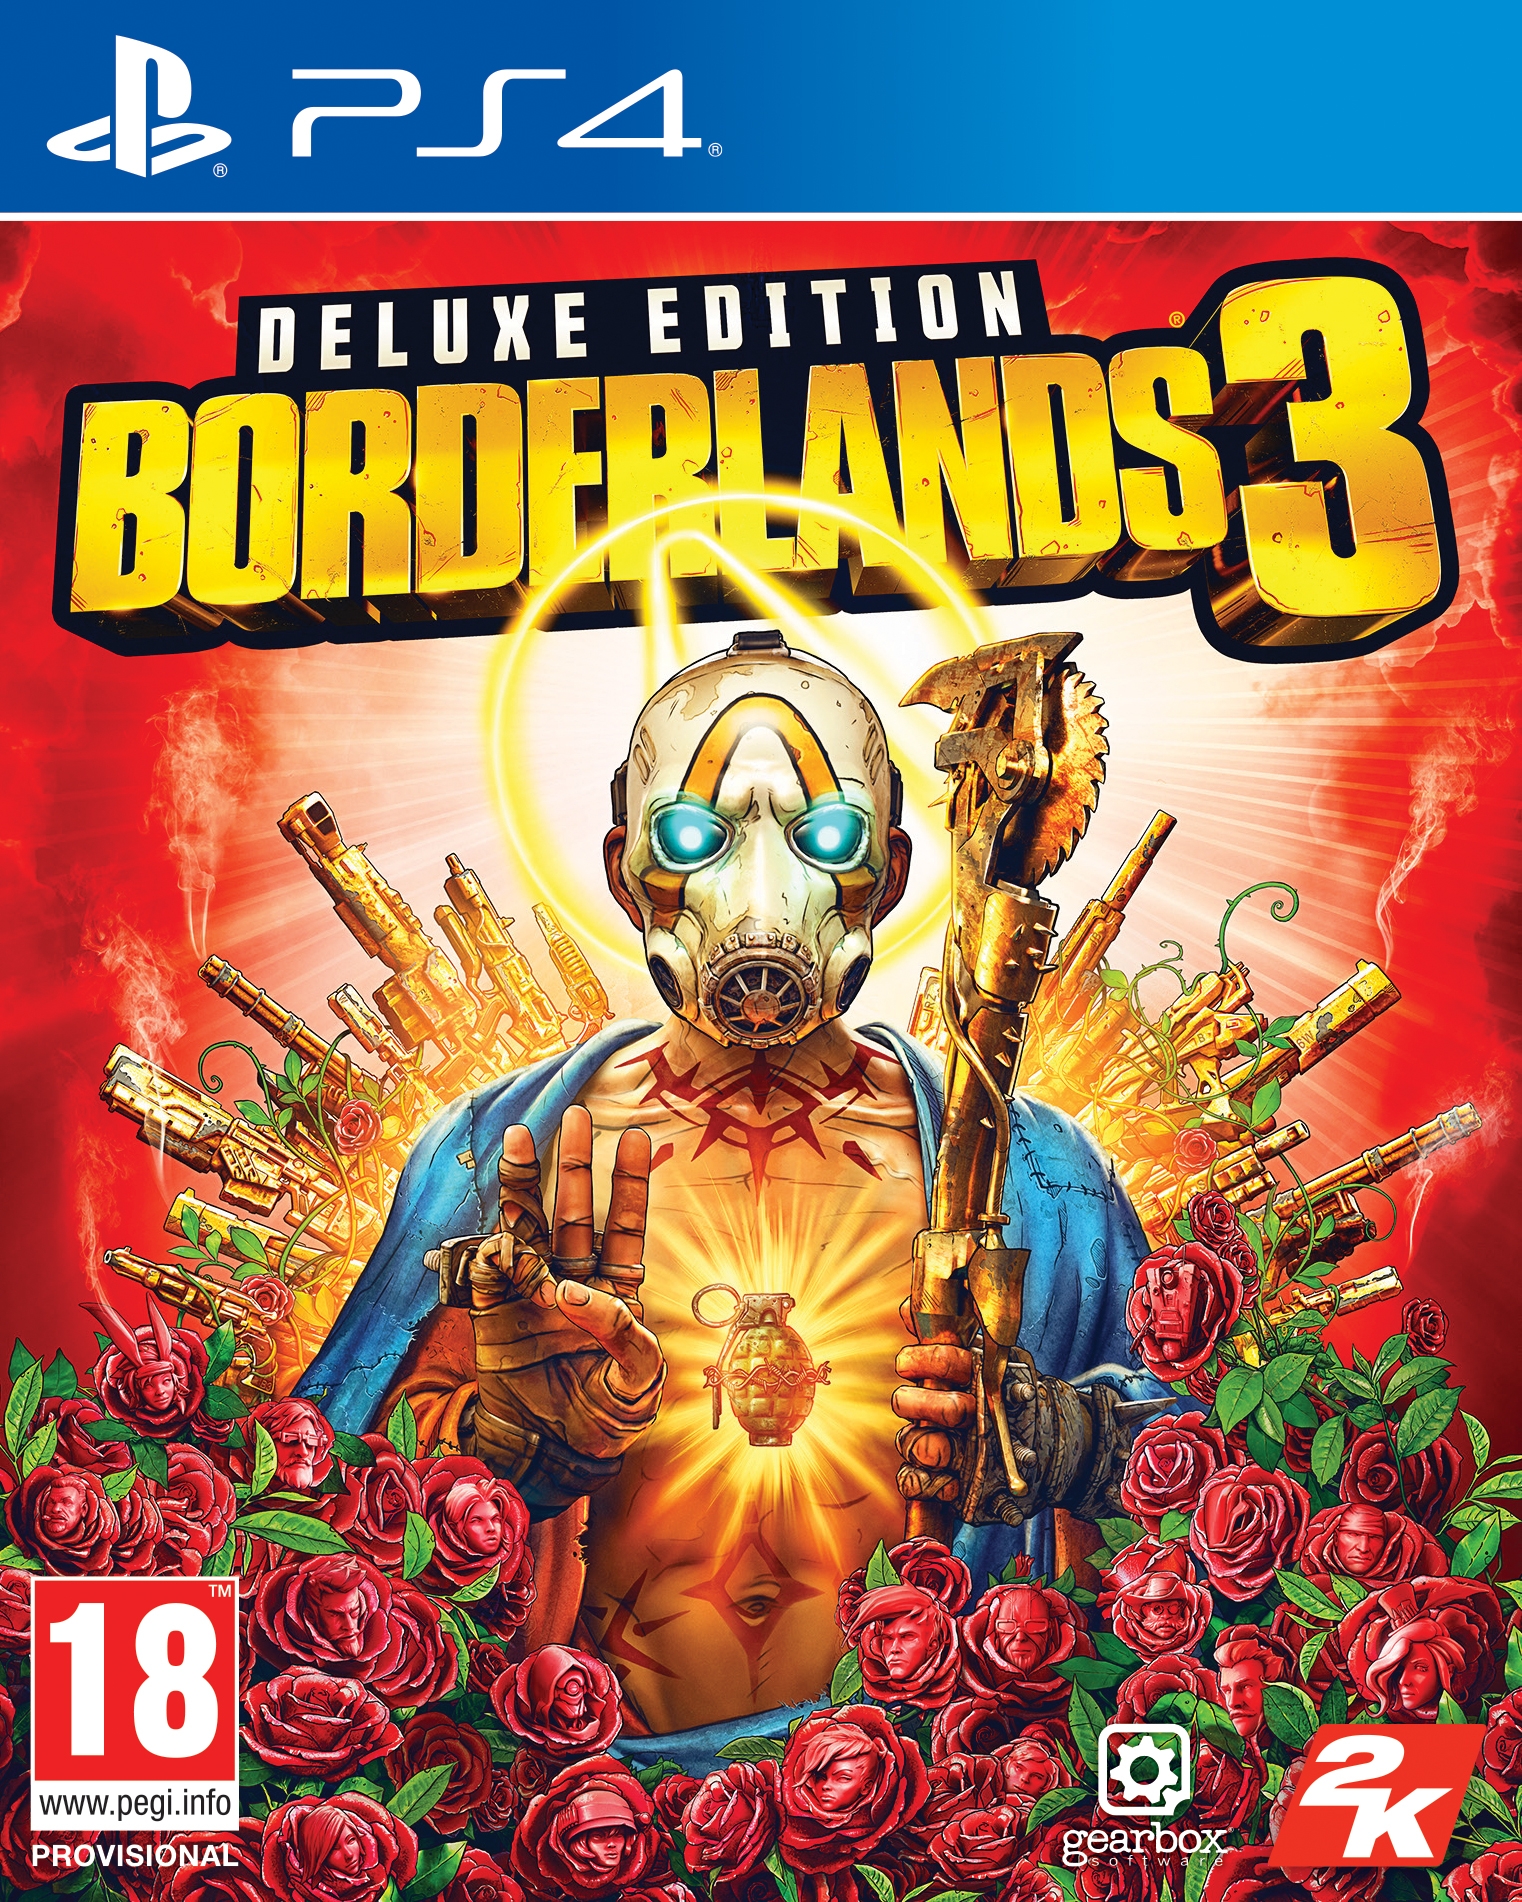 PS4 Borderlands 3 Deluxe Edition